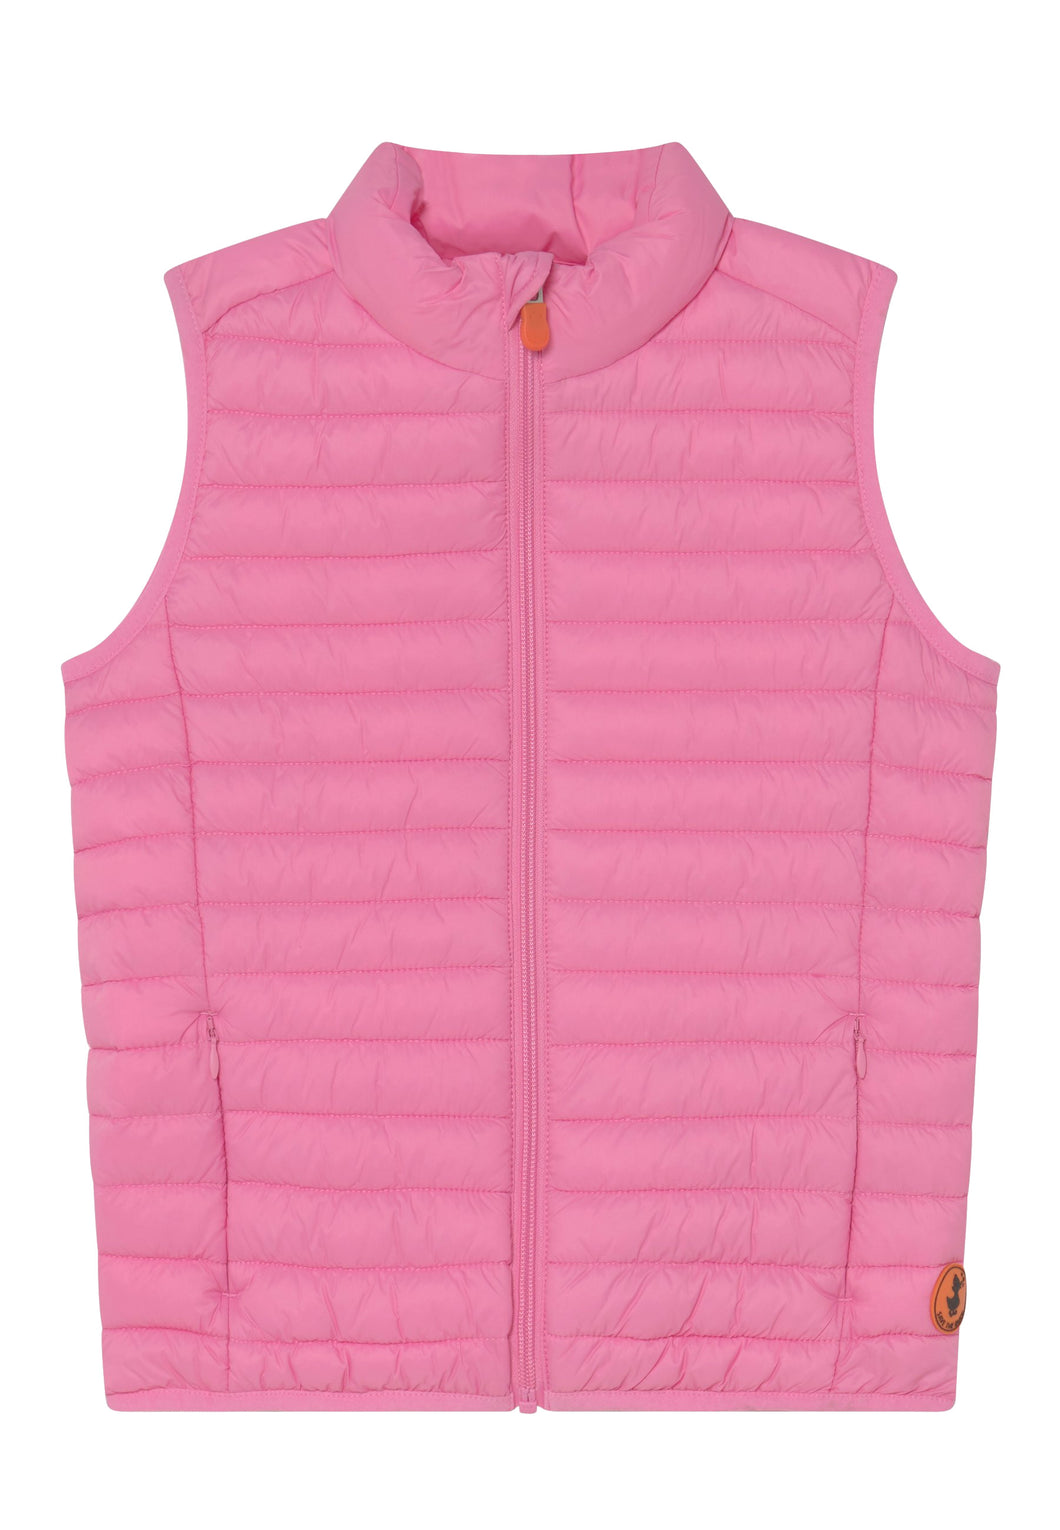 Gilet SAVE THE DUCK rosa 14 Anni